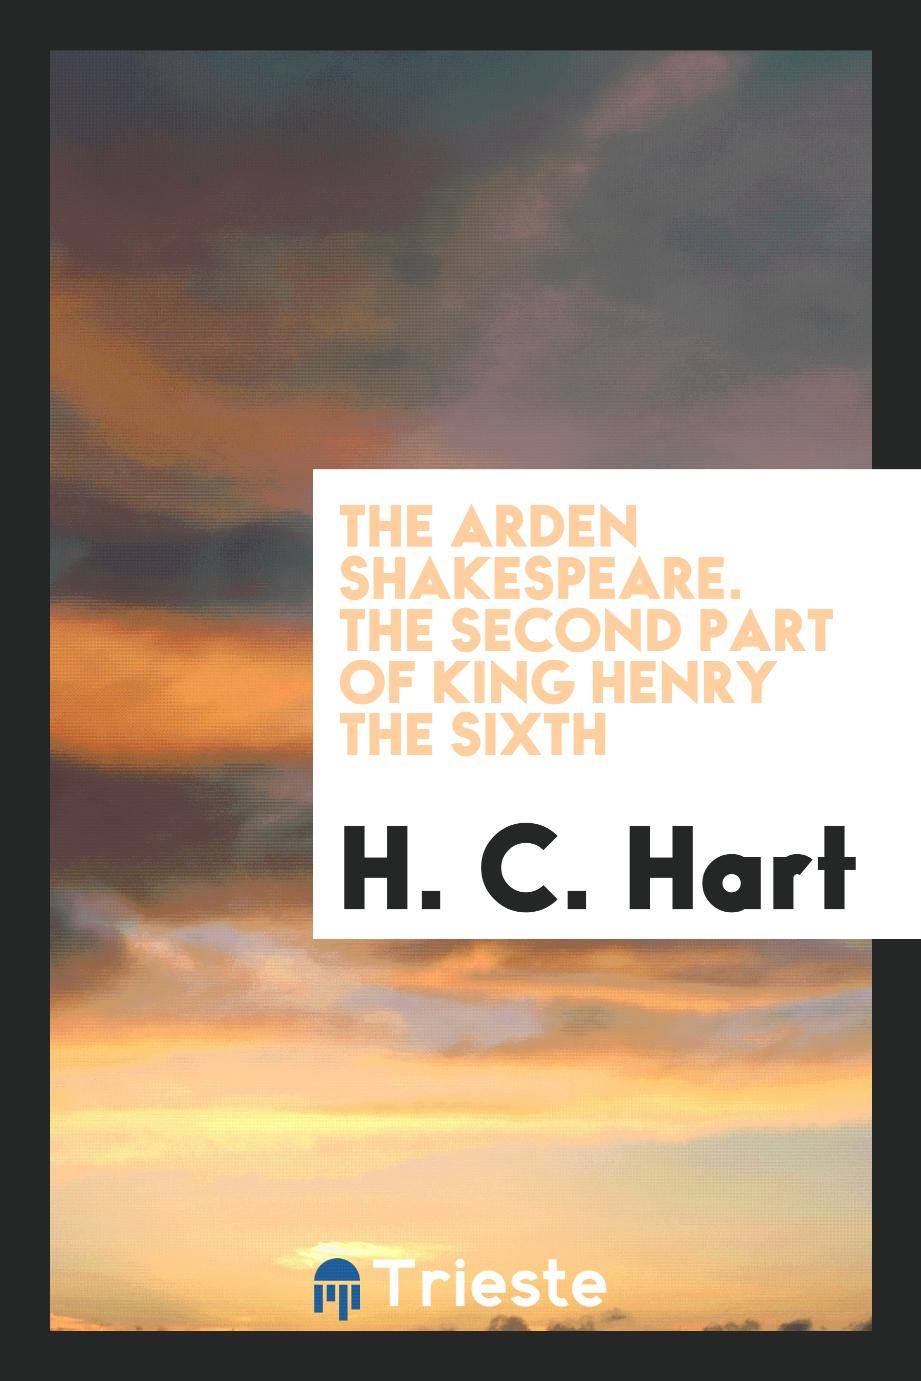 The Arden Shakespeare. The second part of King Henry the Sixth